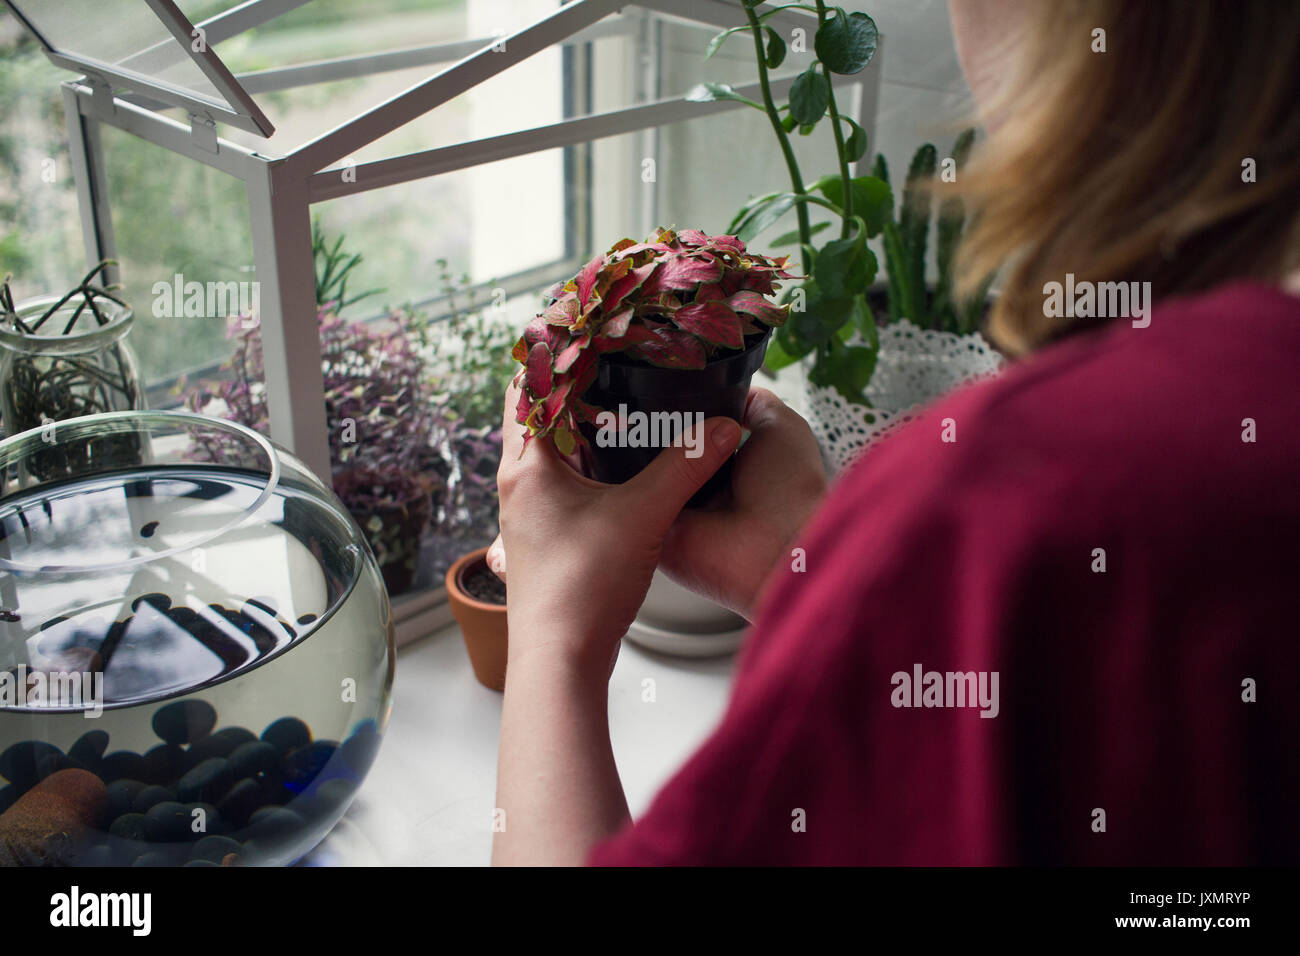 Over shoulder view of woman looking at potted plant from windowsill Stock Photo